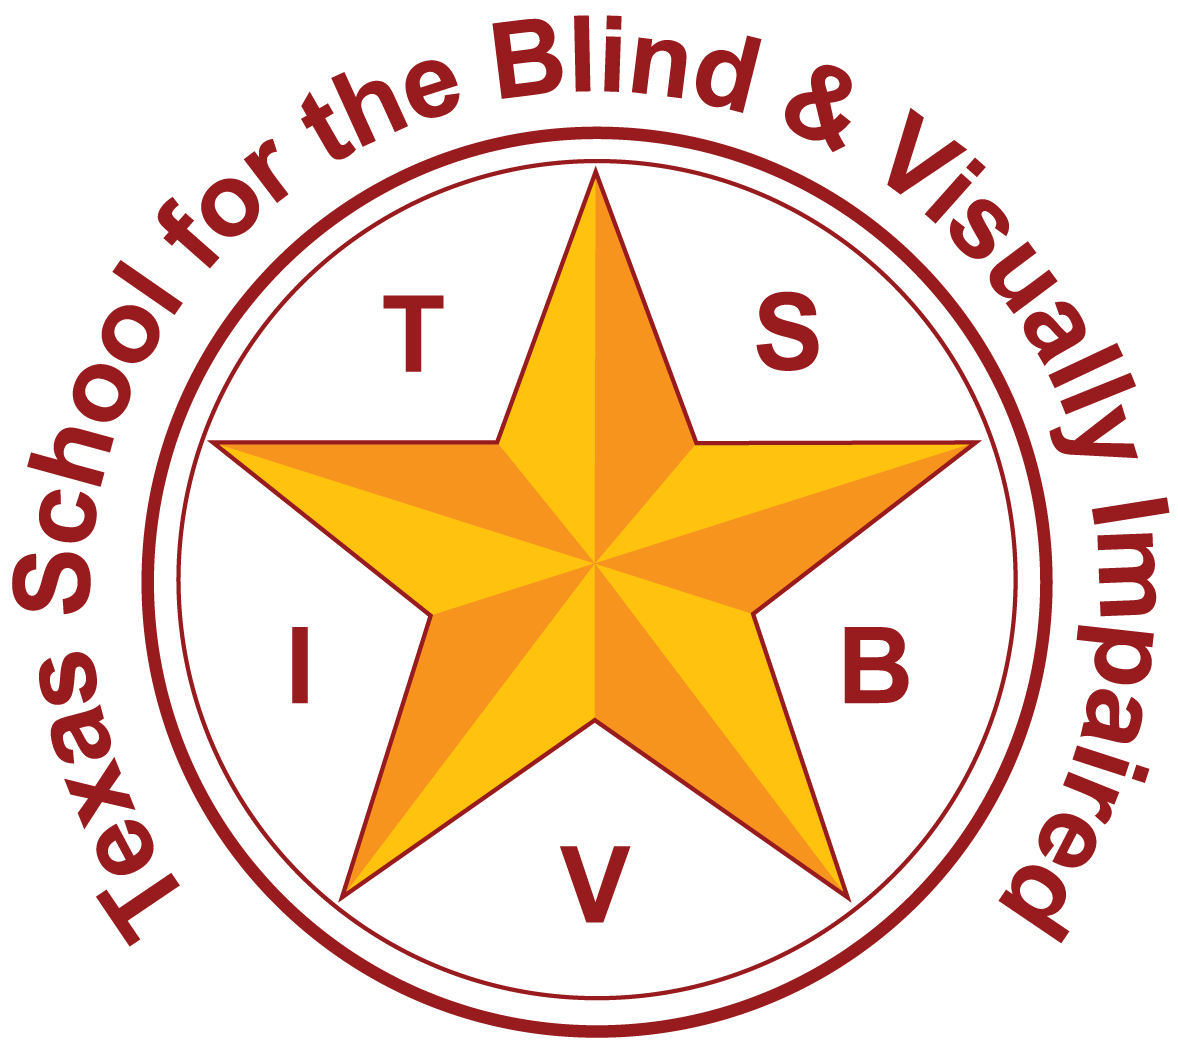 Texas School for the Blind and Visually Impaired